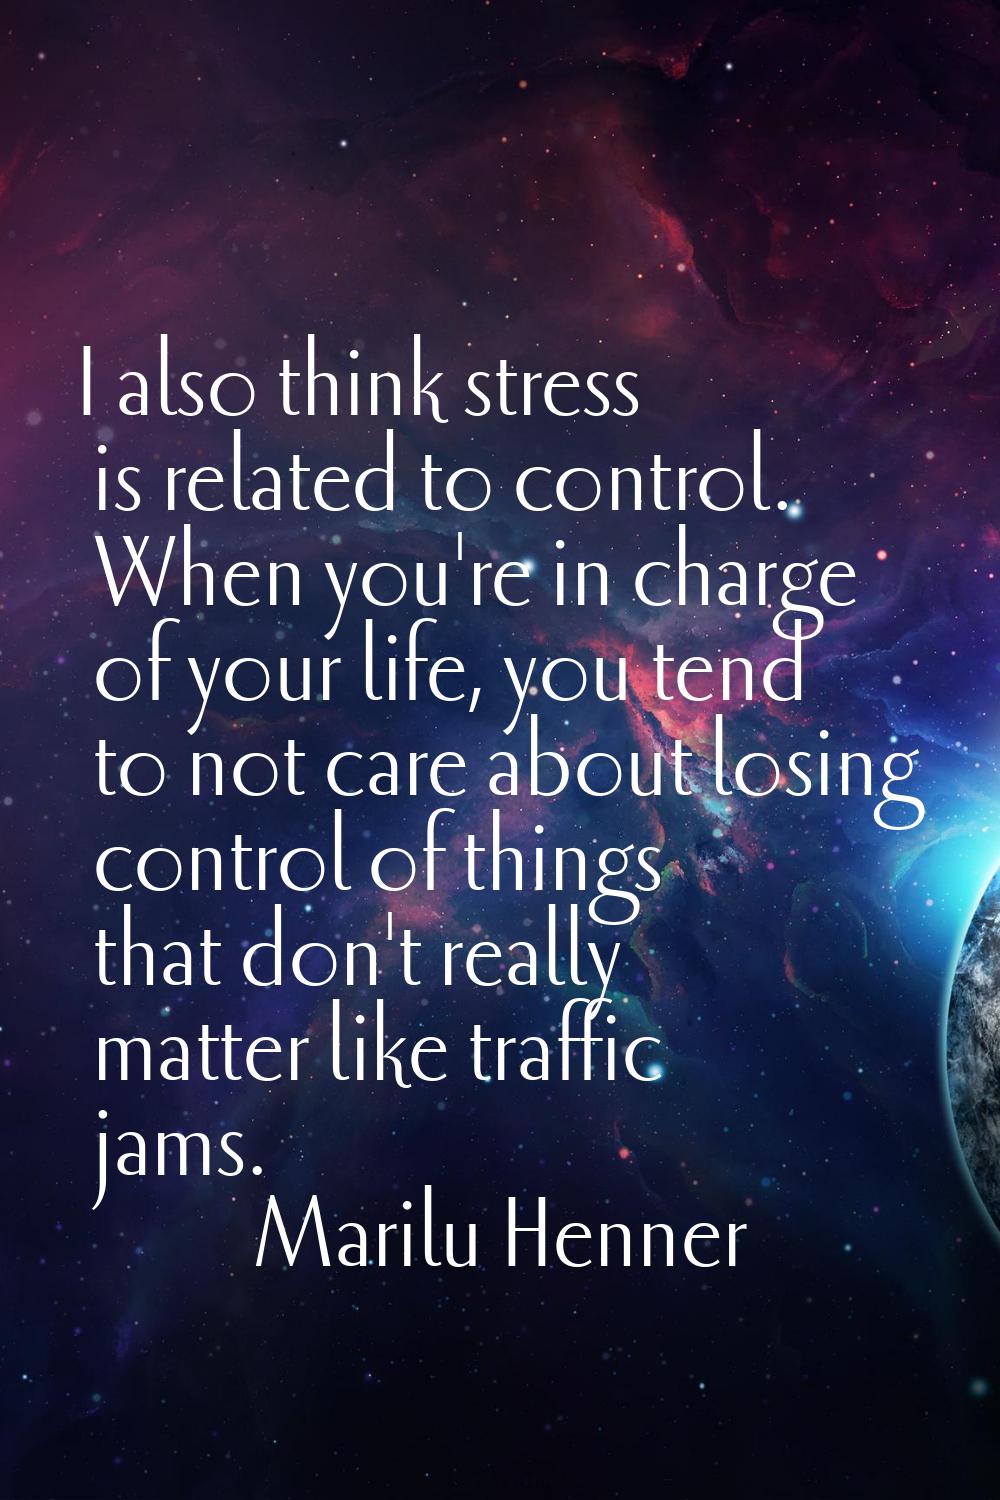 I also think stress is related to control. When you're in charge of your life, you tend to not care